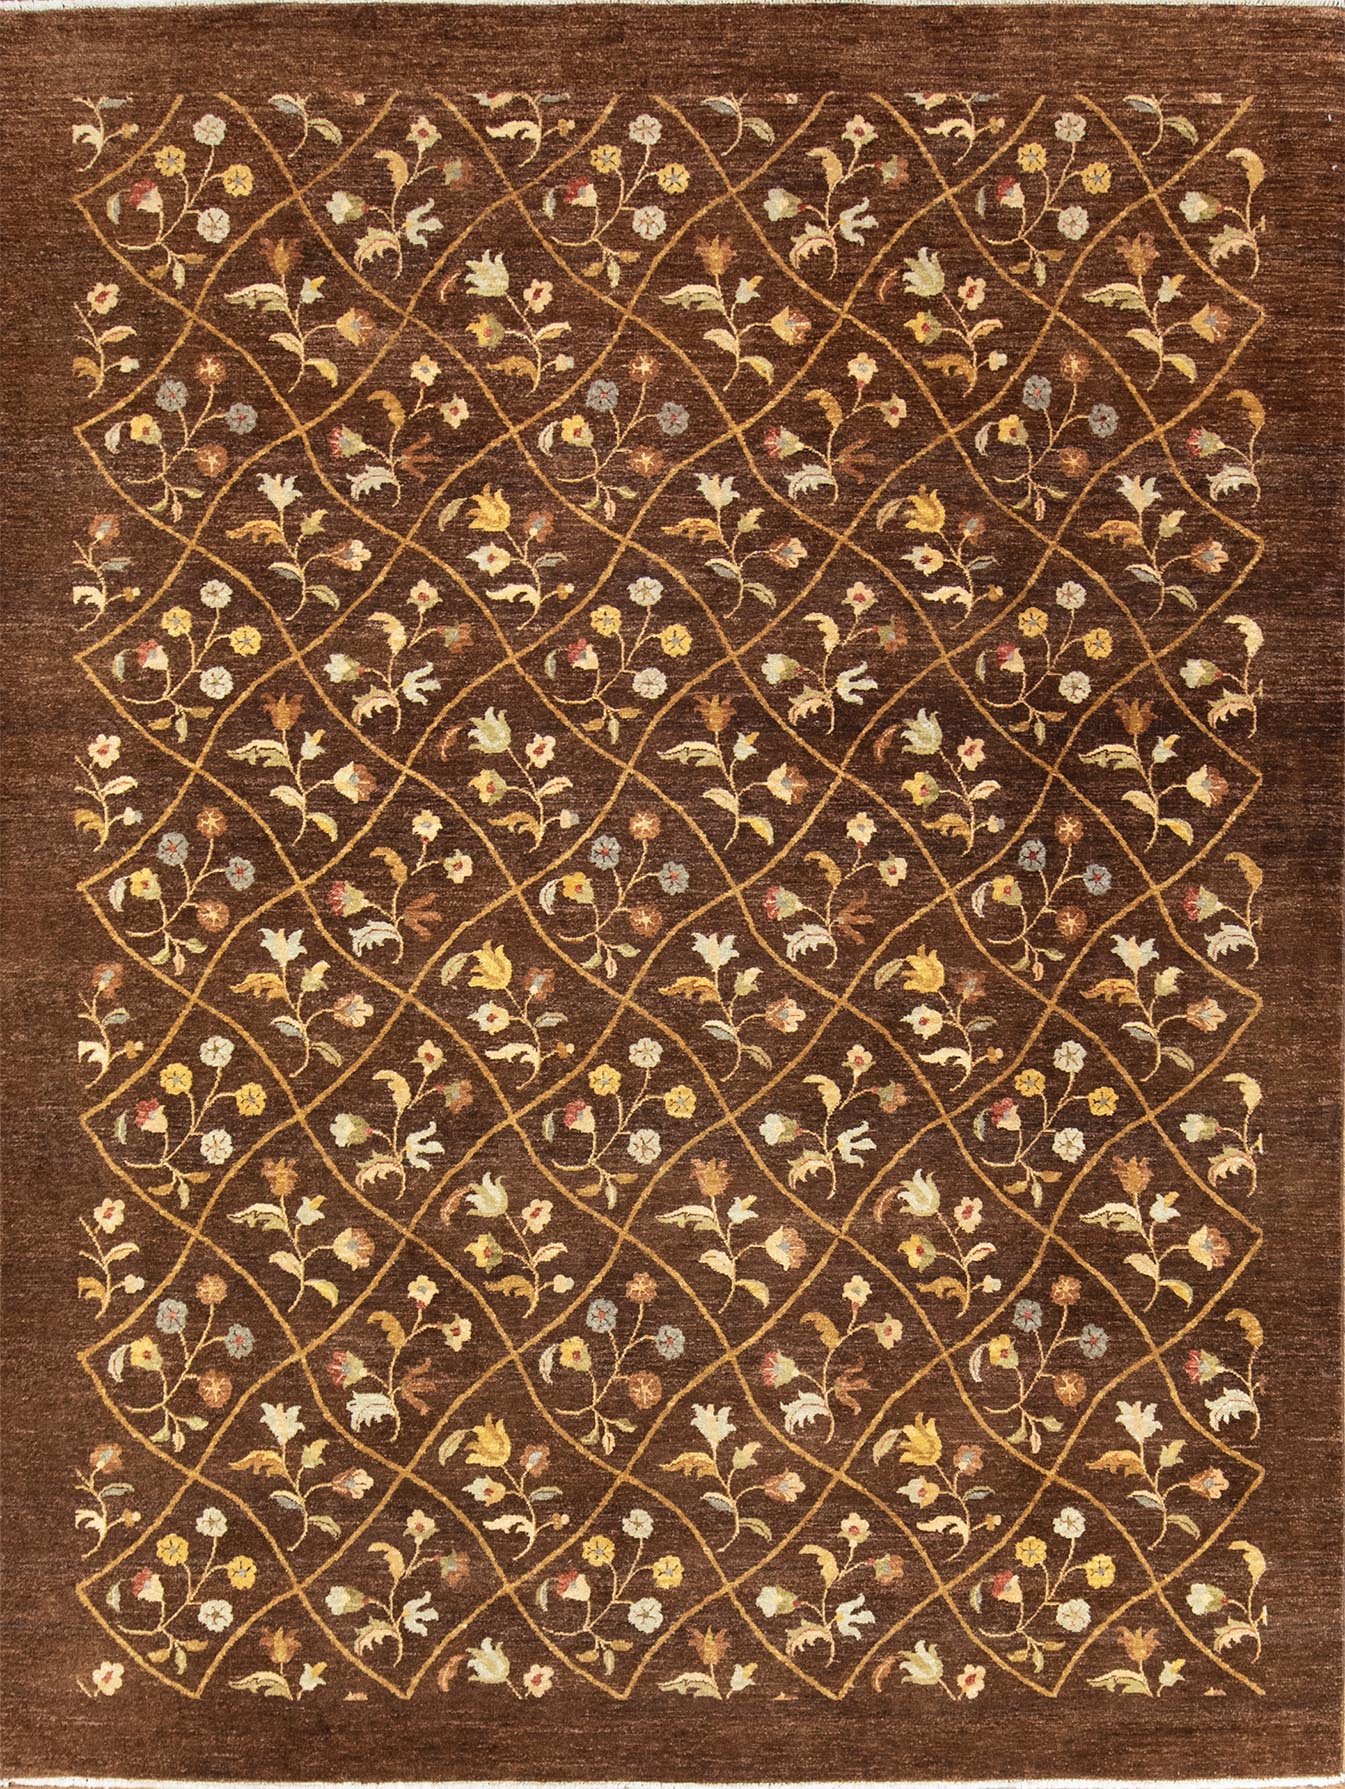 8x10 oriental rug, unique handmade wool floral modern rug in brown color. Size 8x10.